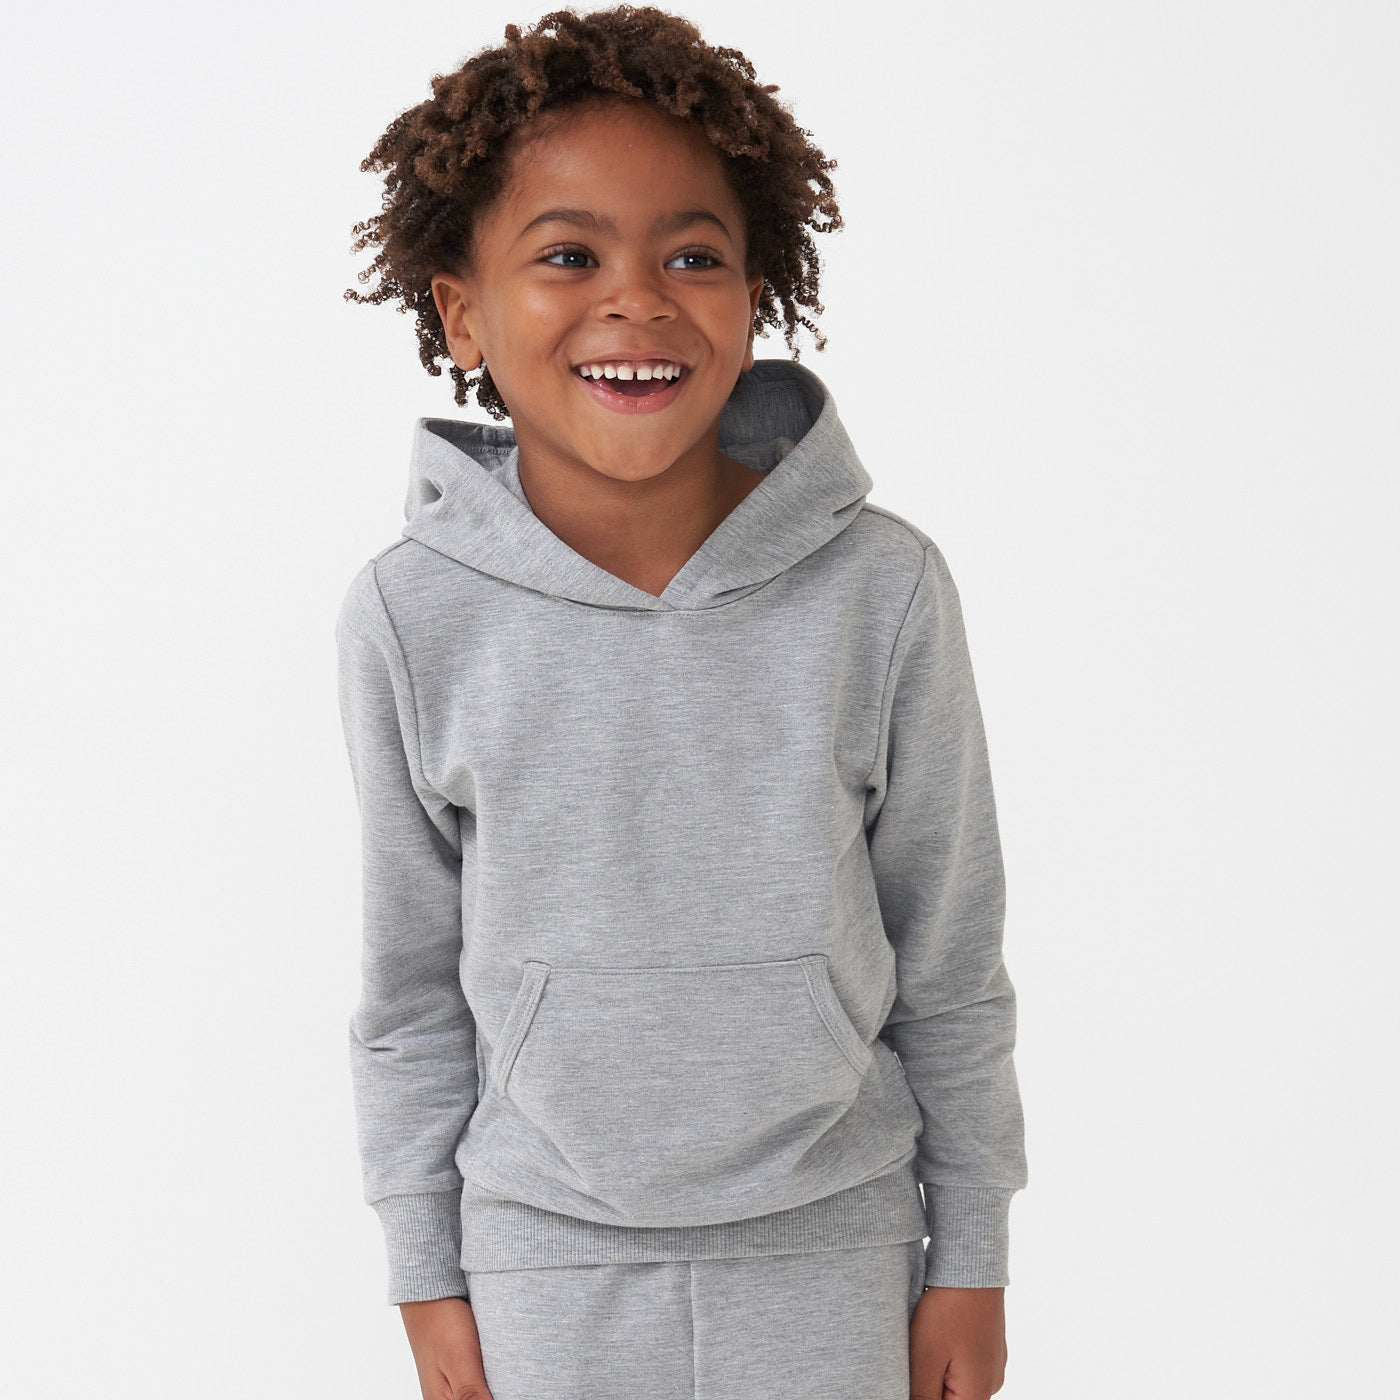 Child posing wearing a Heather Gray pullover hoodie